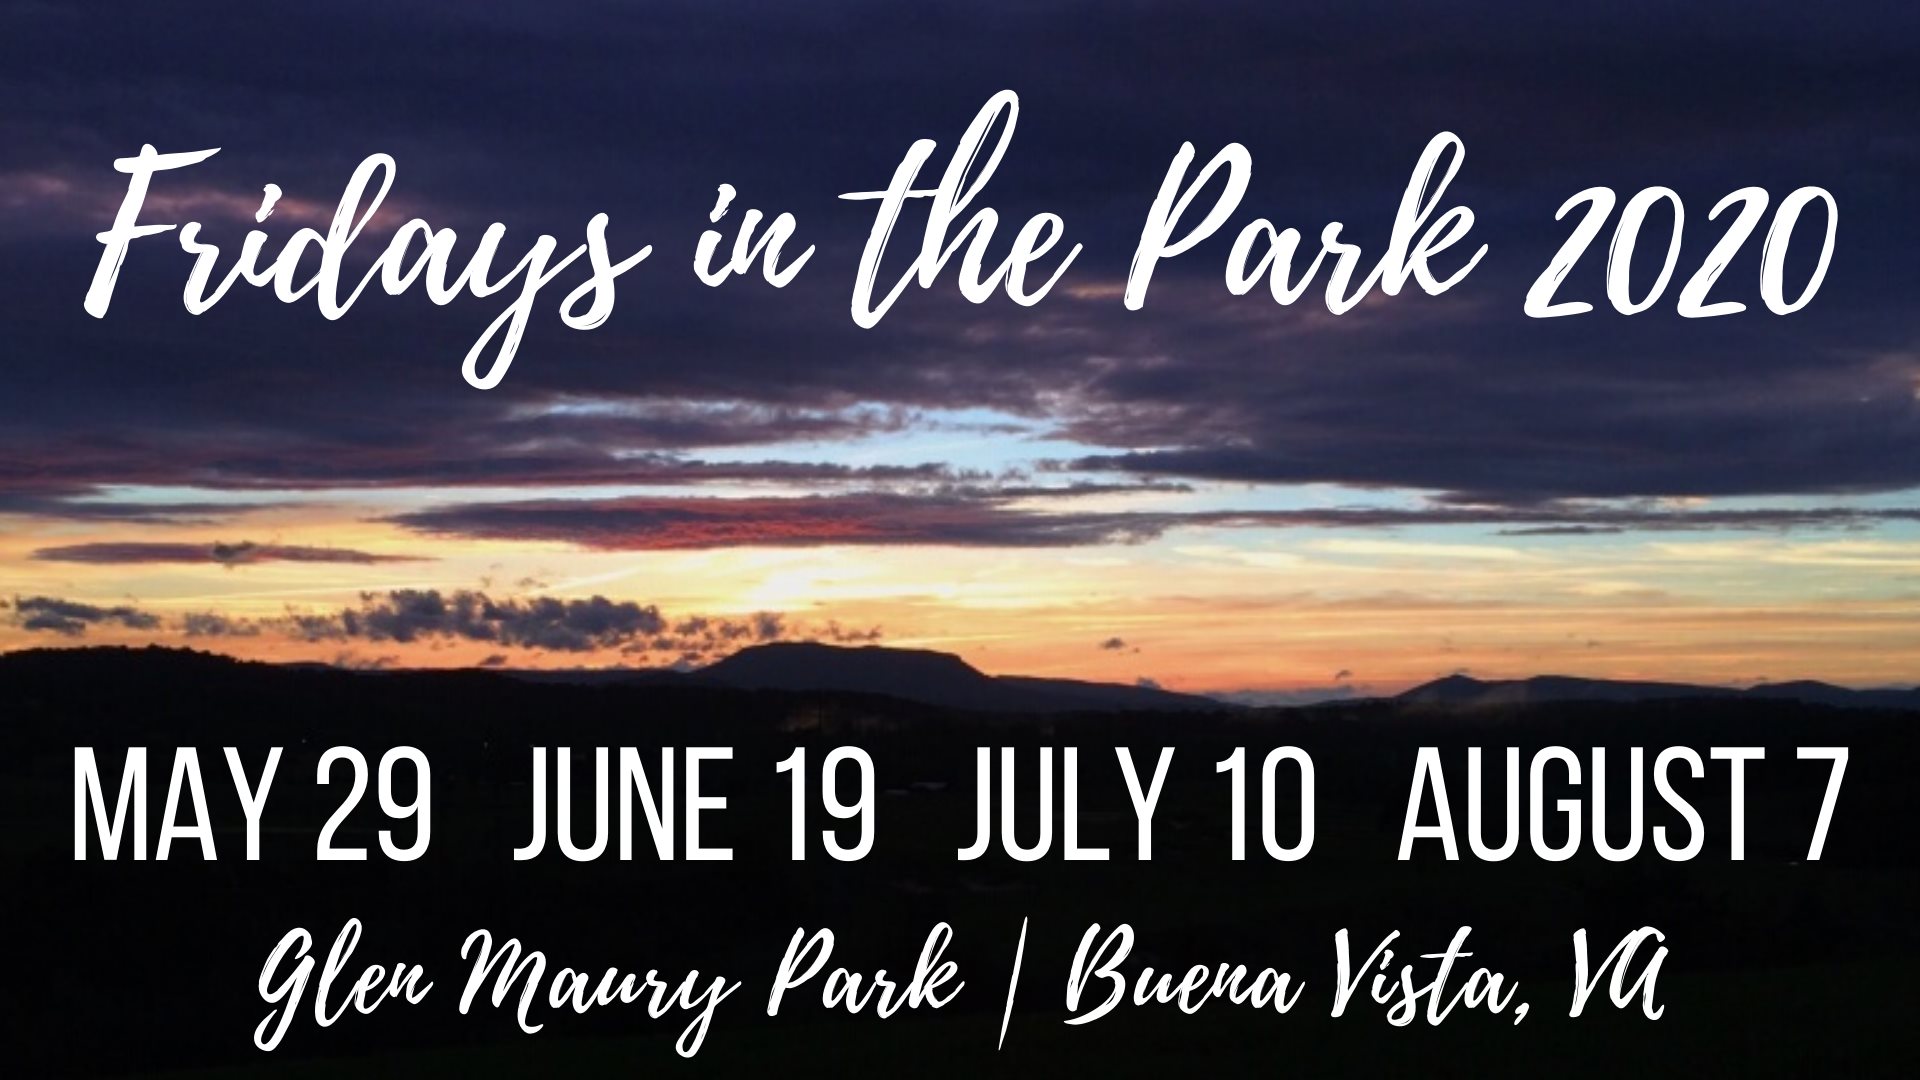 Decorative image with dates and location for Fridays in the park events; May 29, June 19, July 10, and August 7